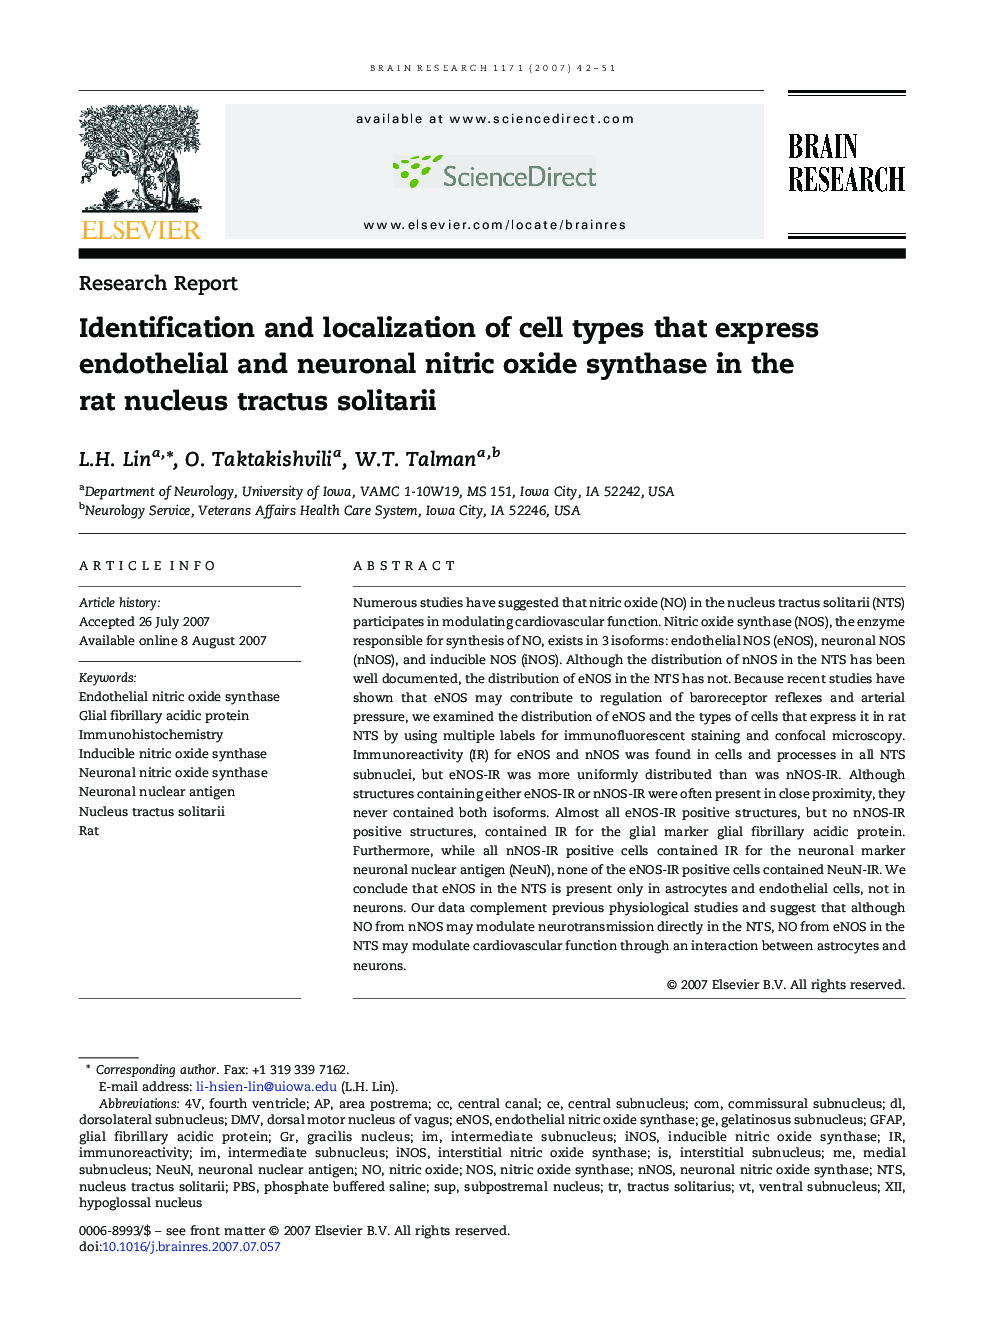 Identification and localization of cell types that express endothelial and neuronal nitric oxide synthase in the rat nucleus tractus solitarii